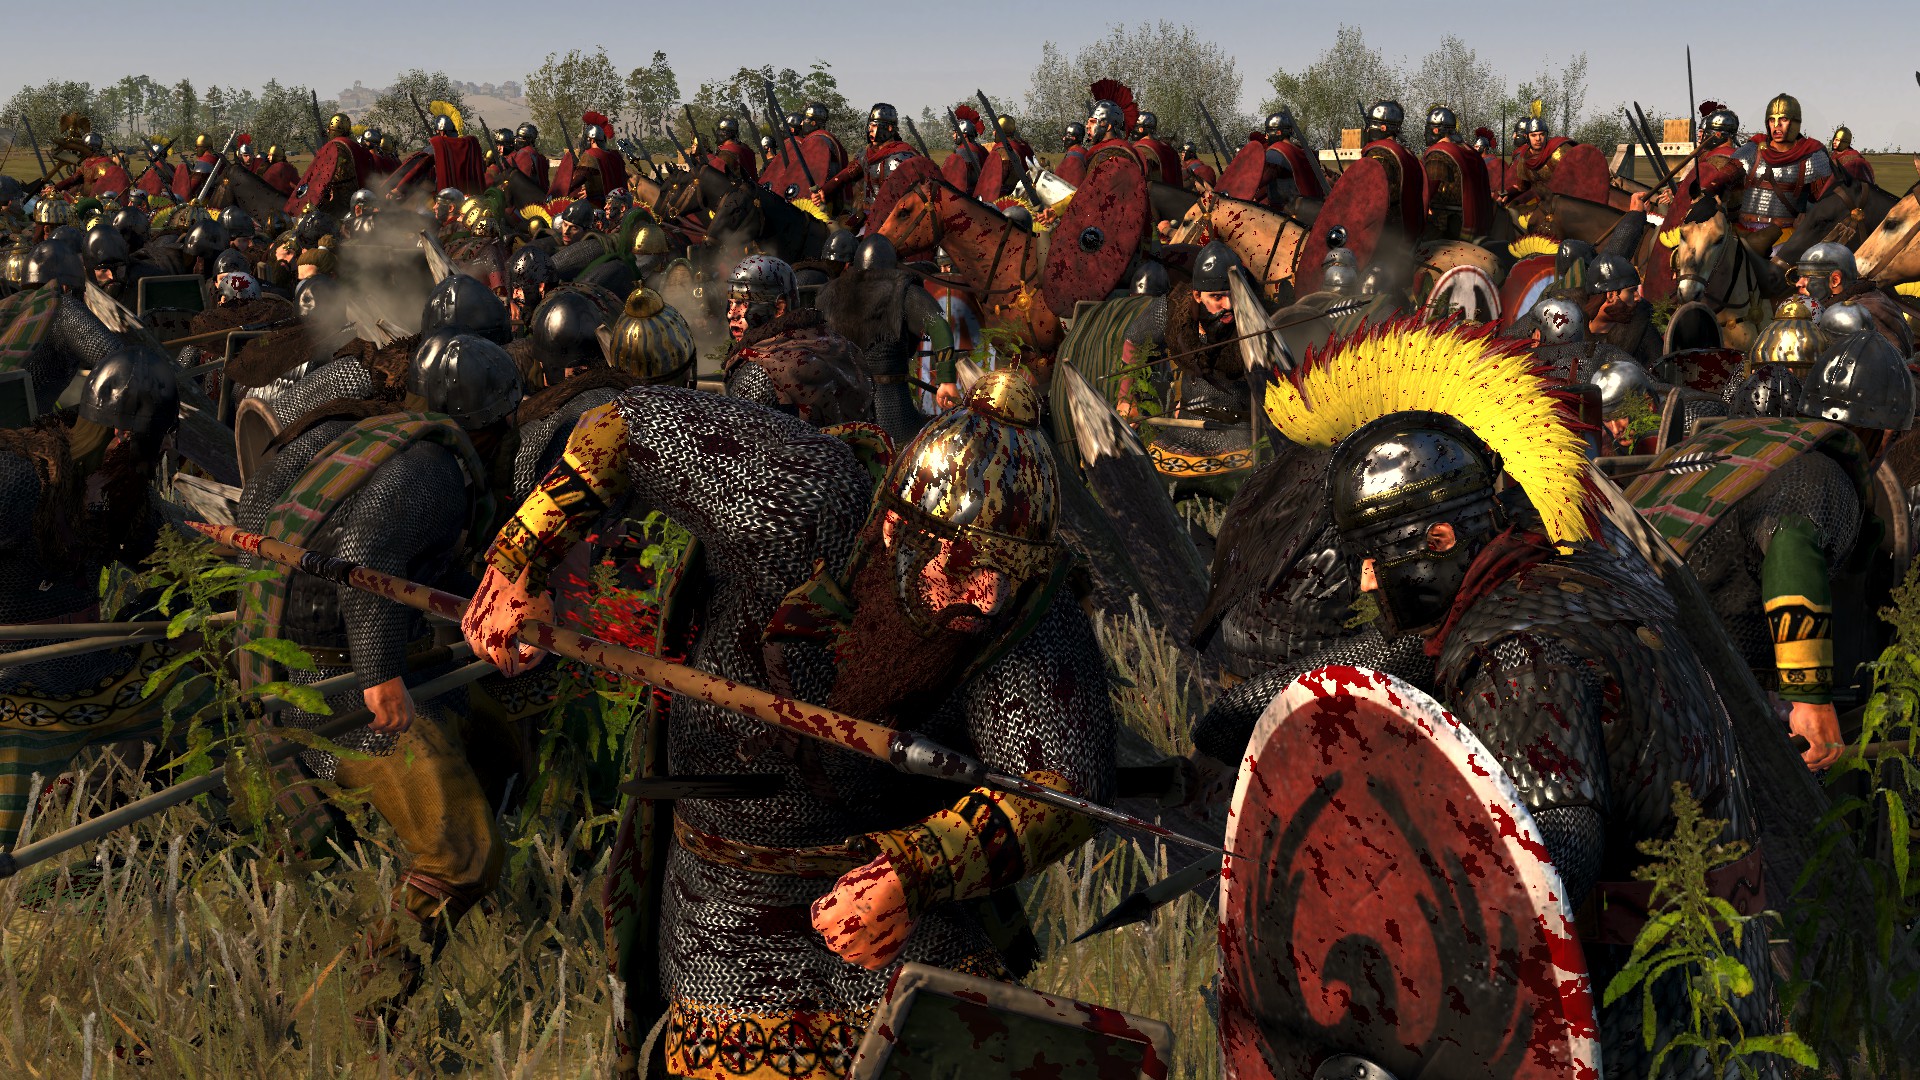 agrez all in one mod for total war attila, image 21, image, screenshots, sc...